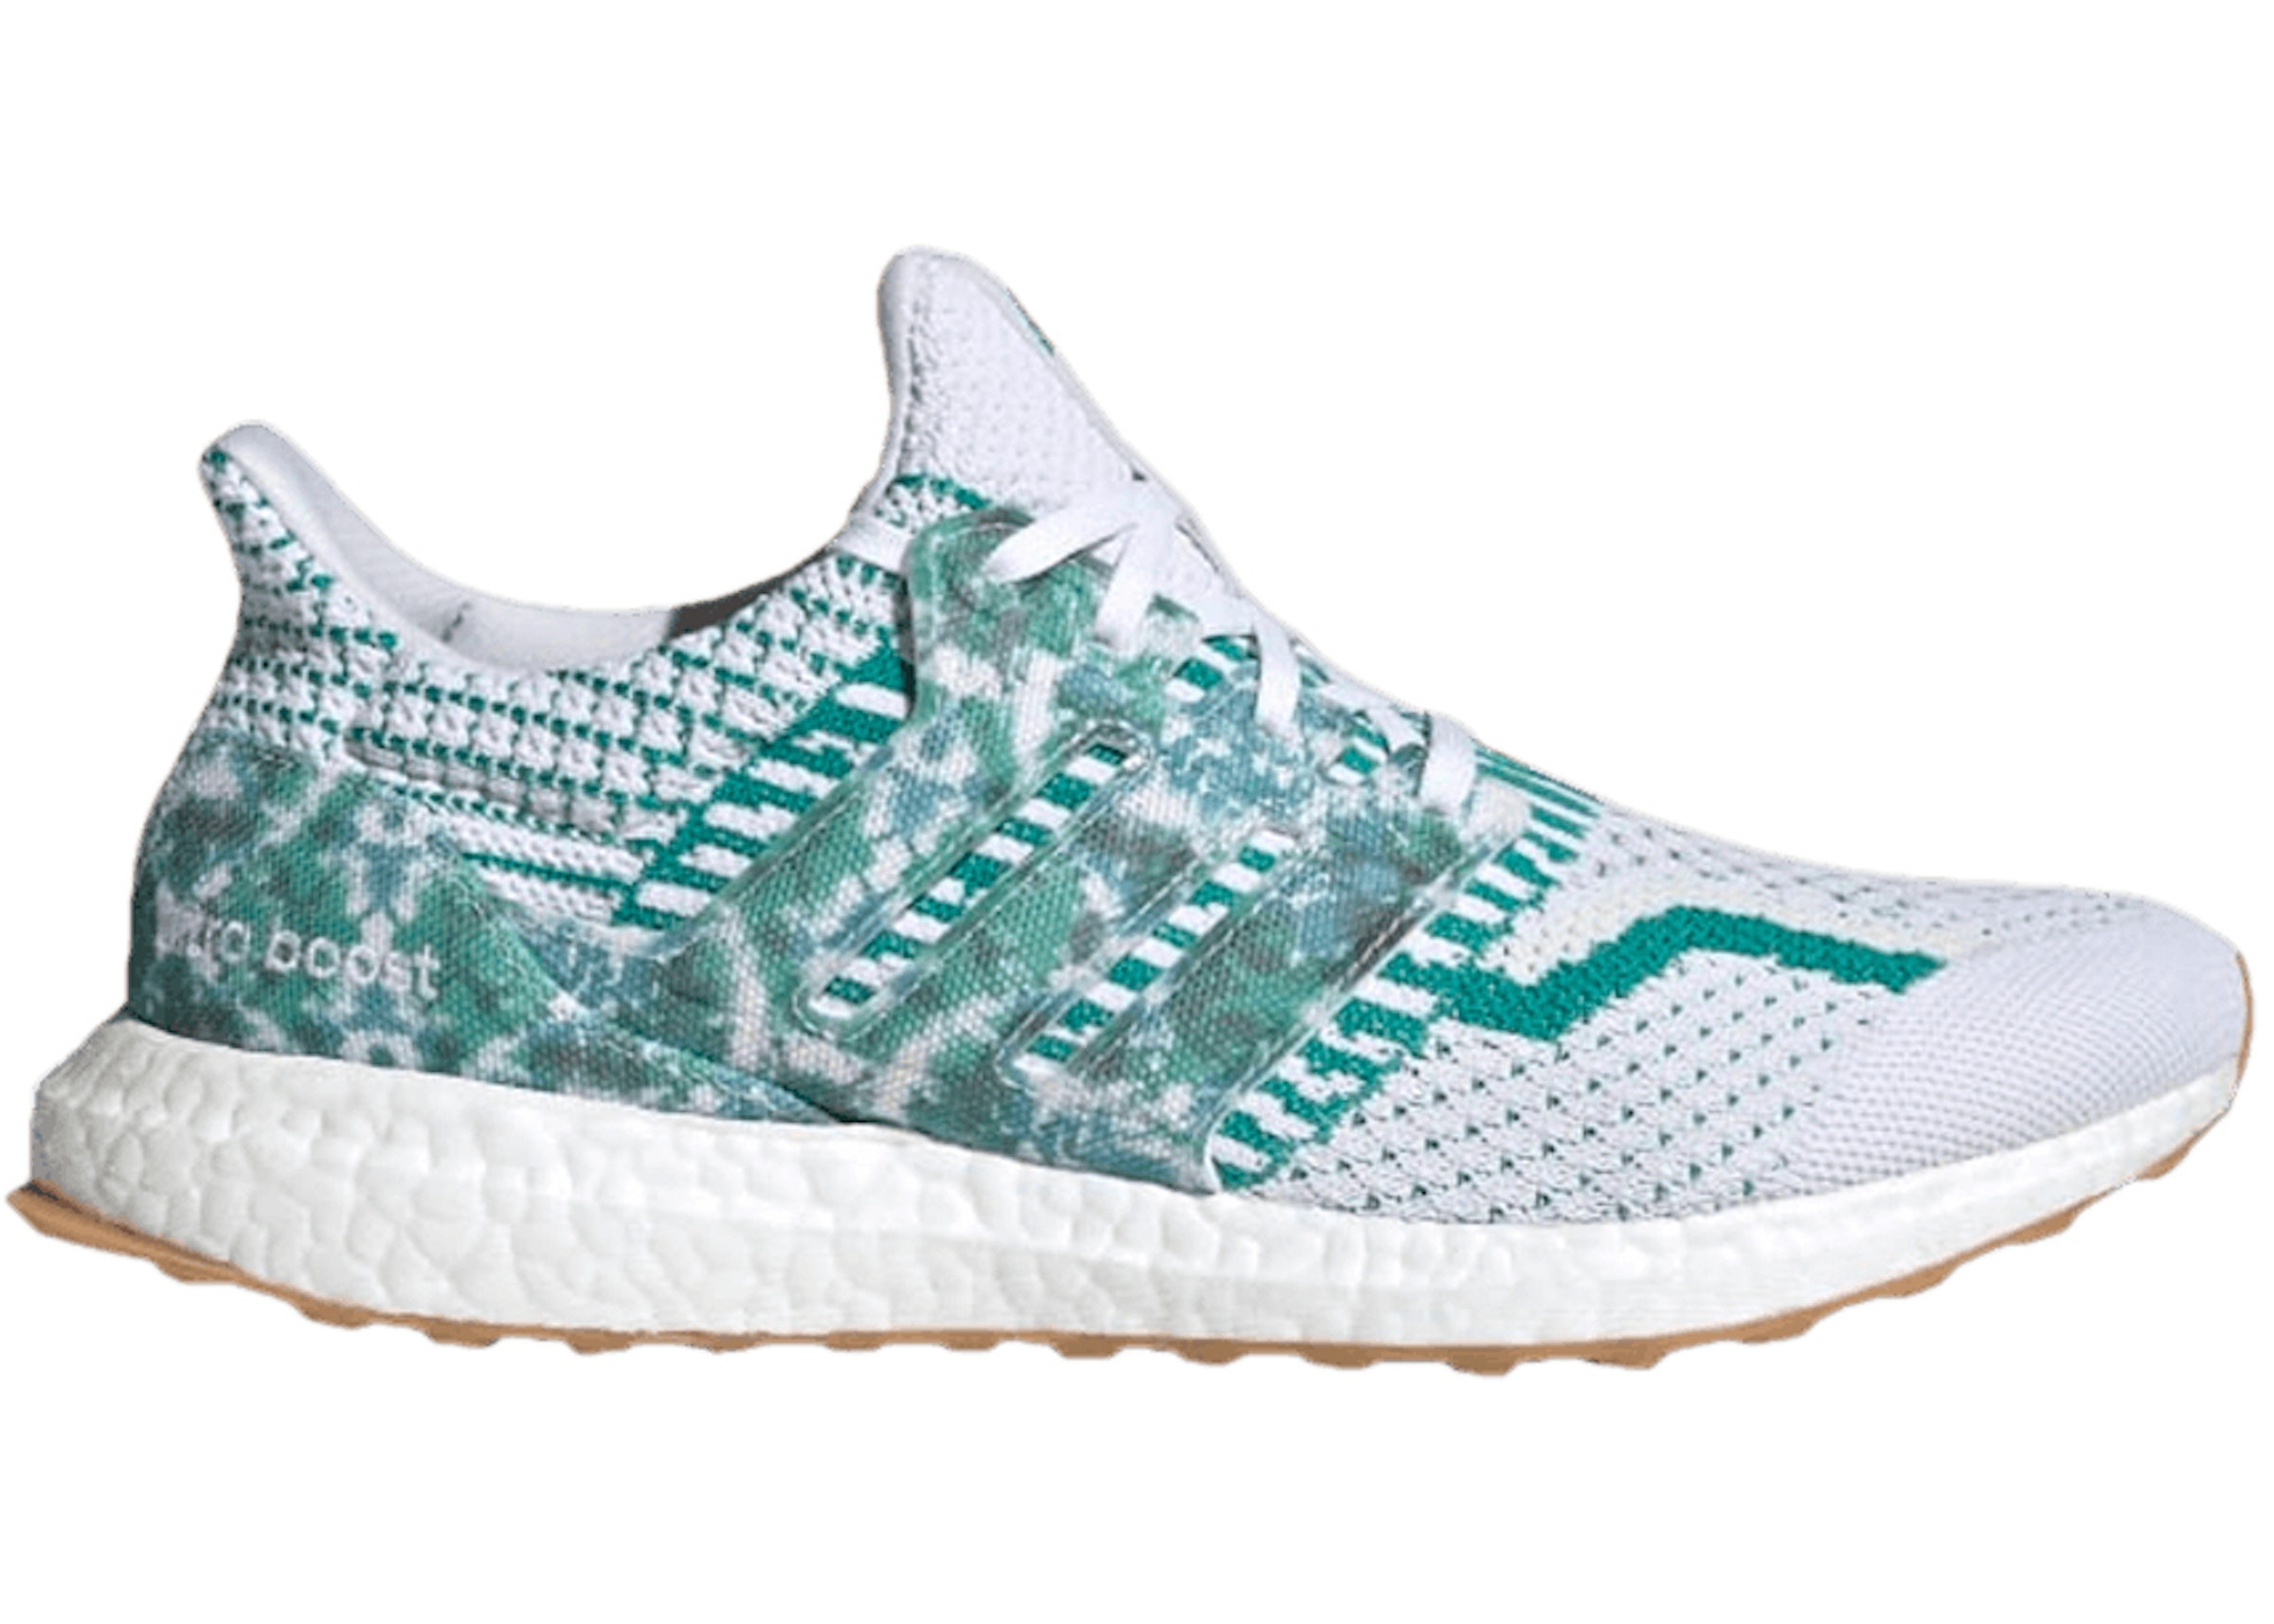 Ultra Boost 5.0 DNA White Green - GY3194 - US